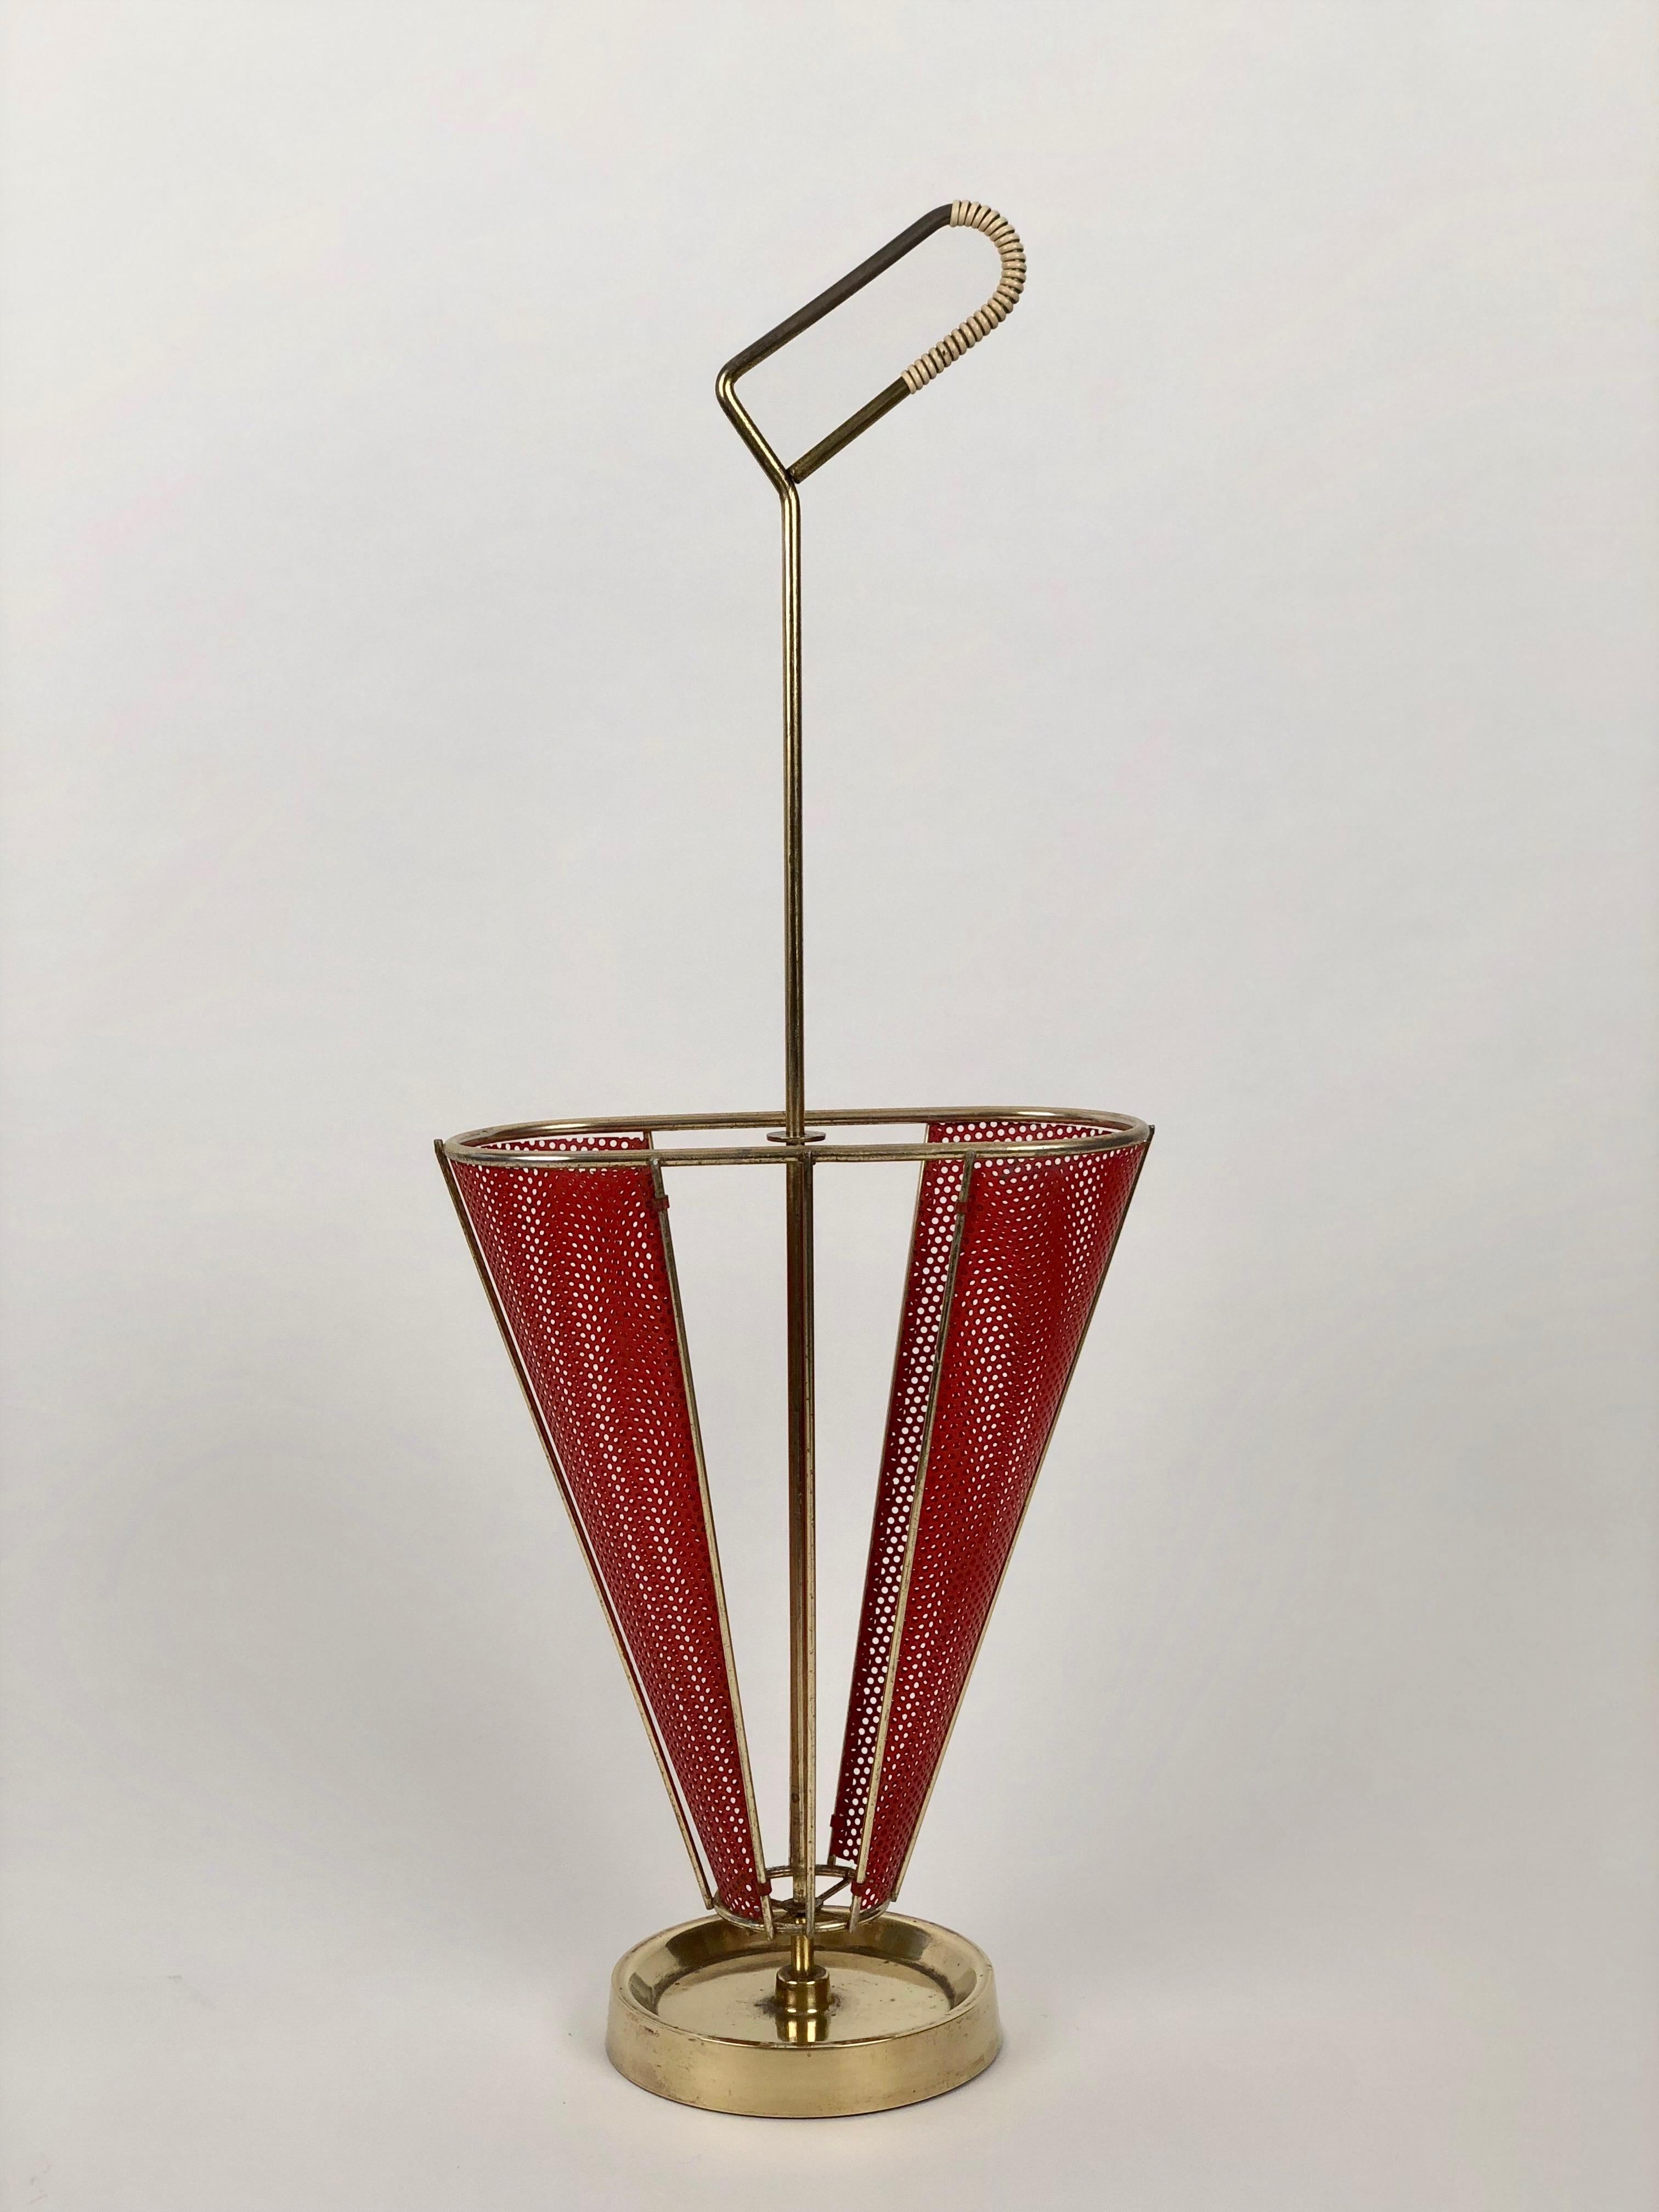 An umbrella stand designed and produced by Mathieu Mategot from the 1950's. 
The stand uses Mategot s own technique of combining metal tubes or rods with 
perforated metal sheet.

Like fabric, Rigtulle could be bent or folded and shaped to give